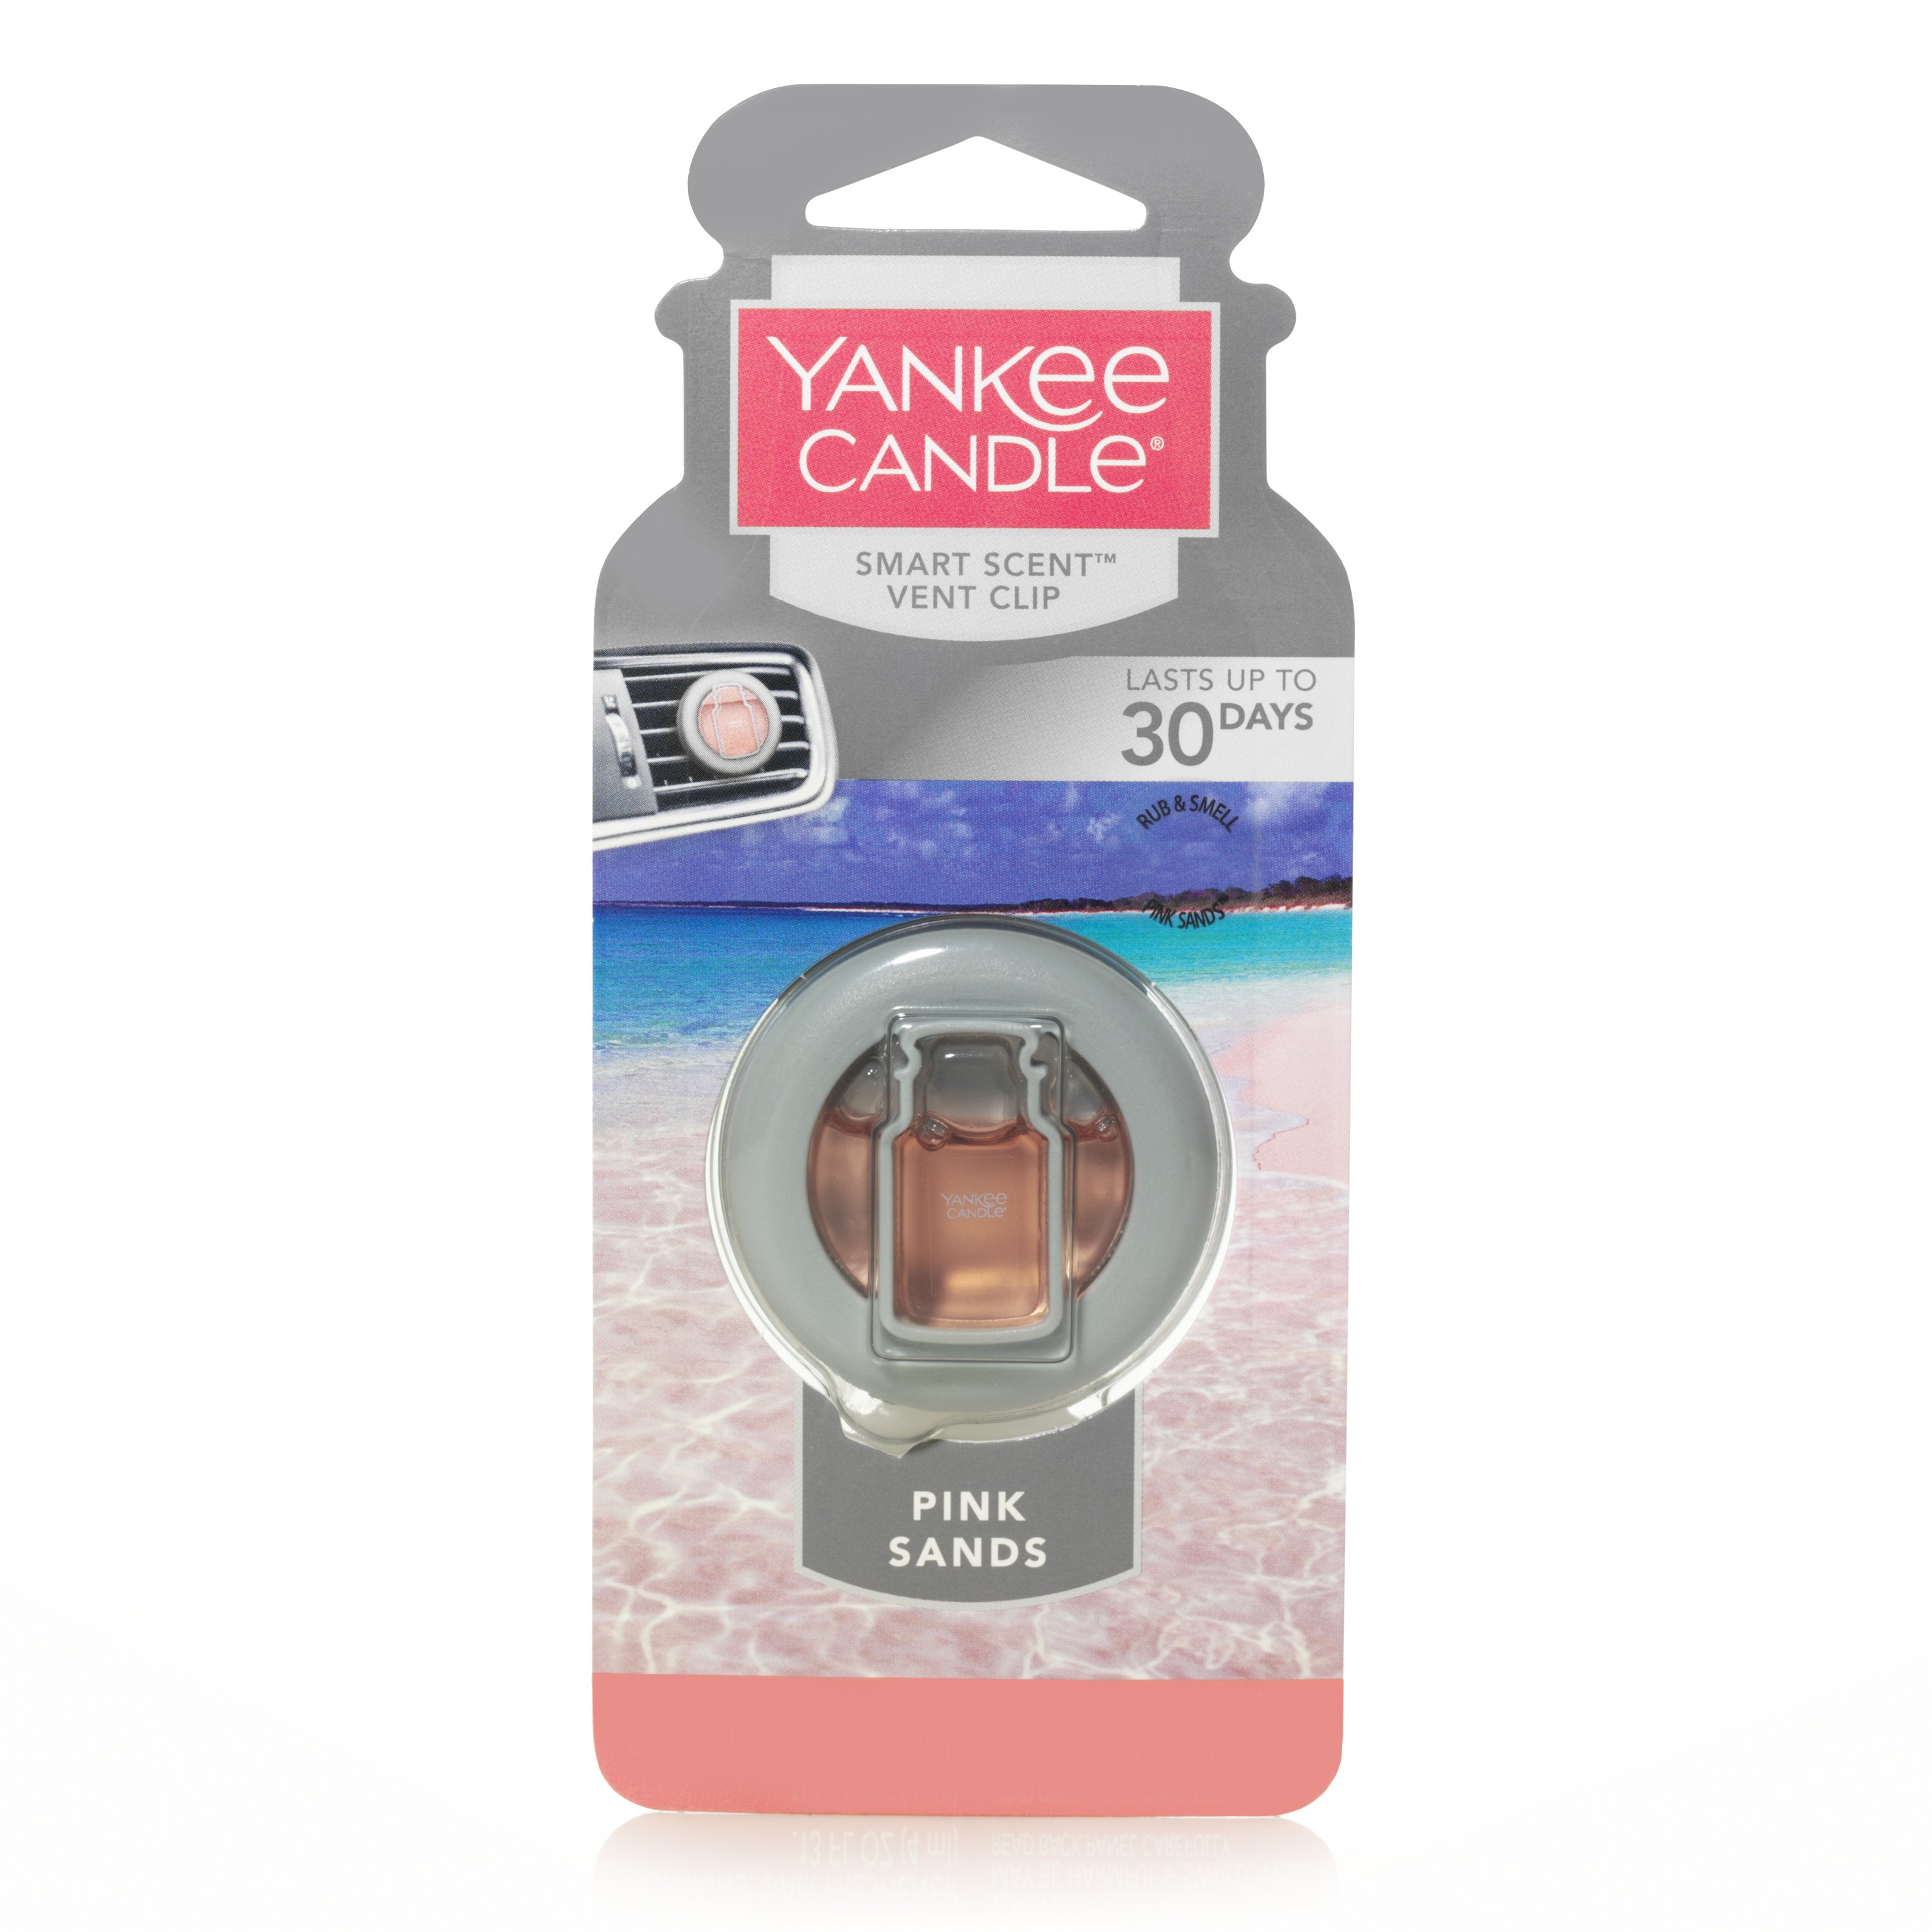 Yankee Candle Pink Sands Vent Clip Refill